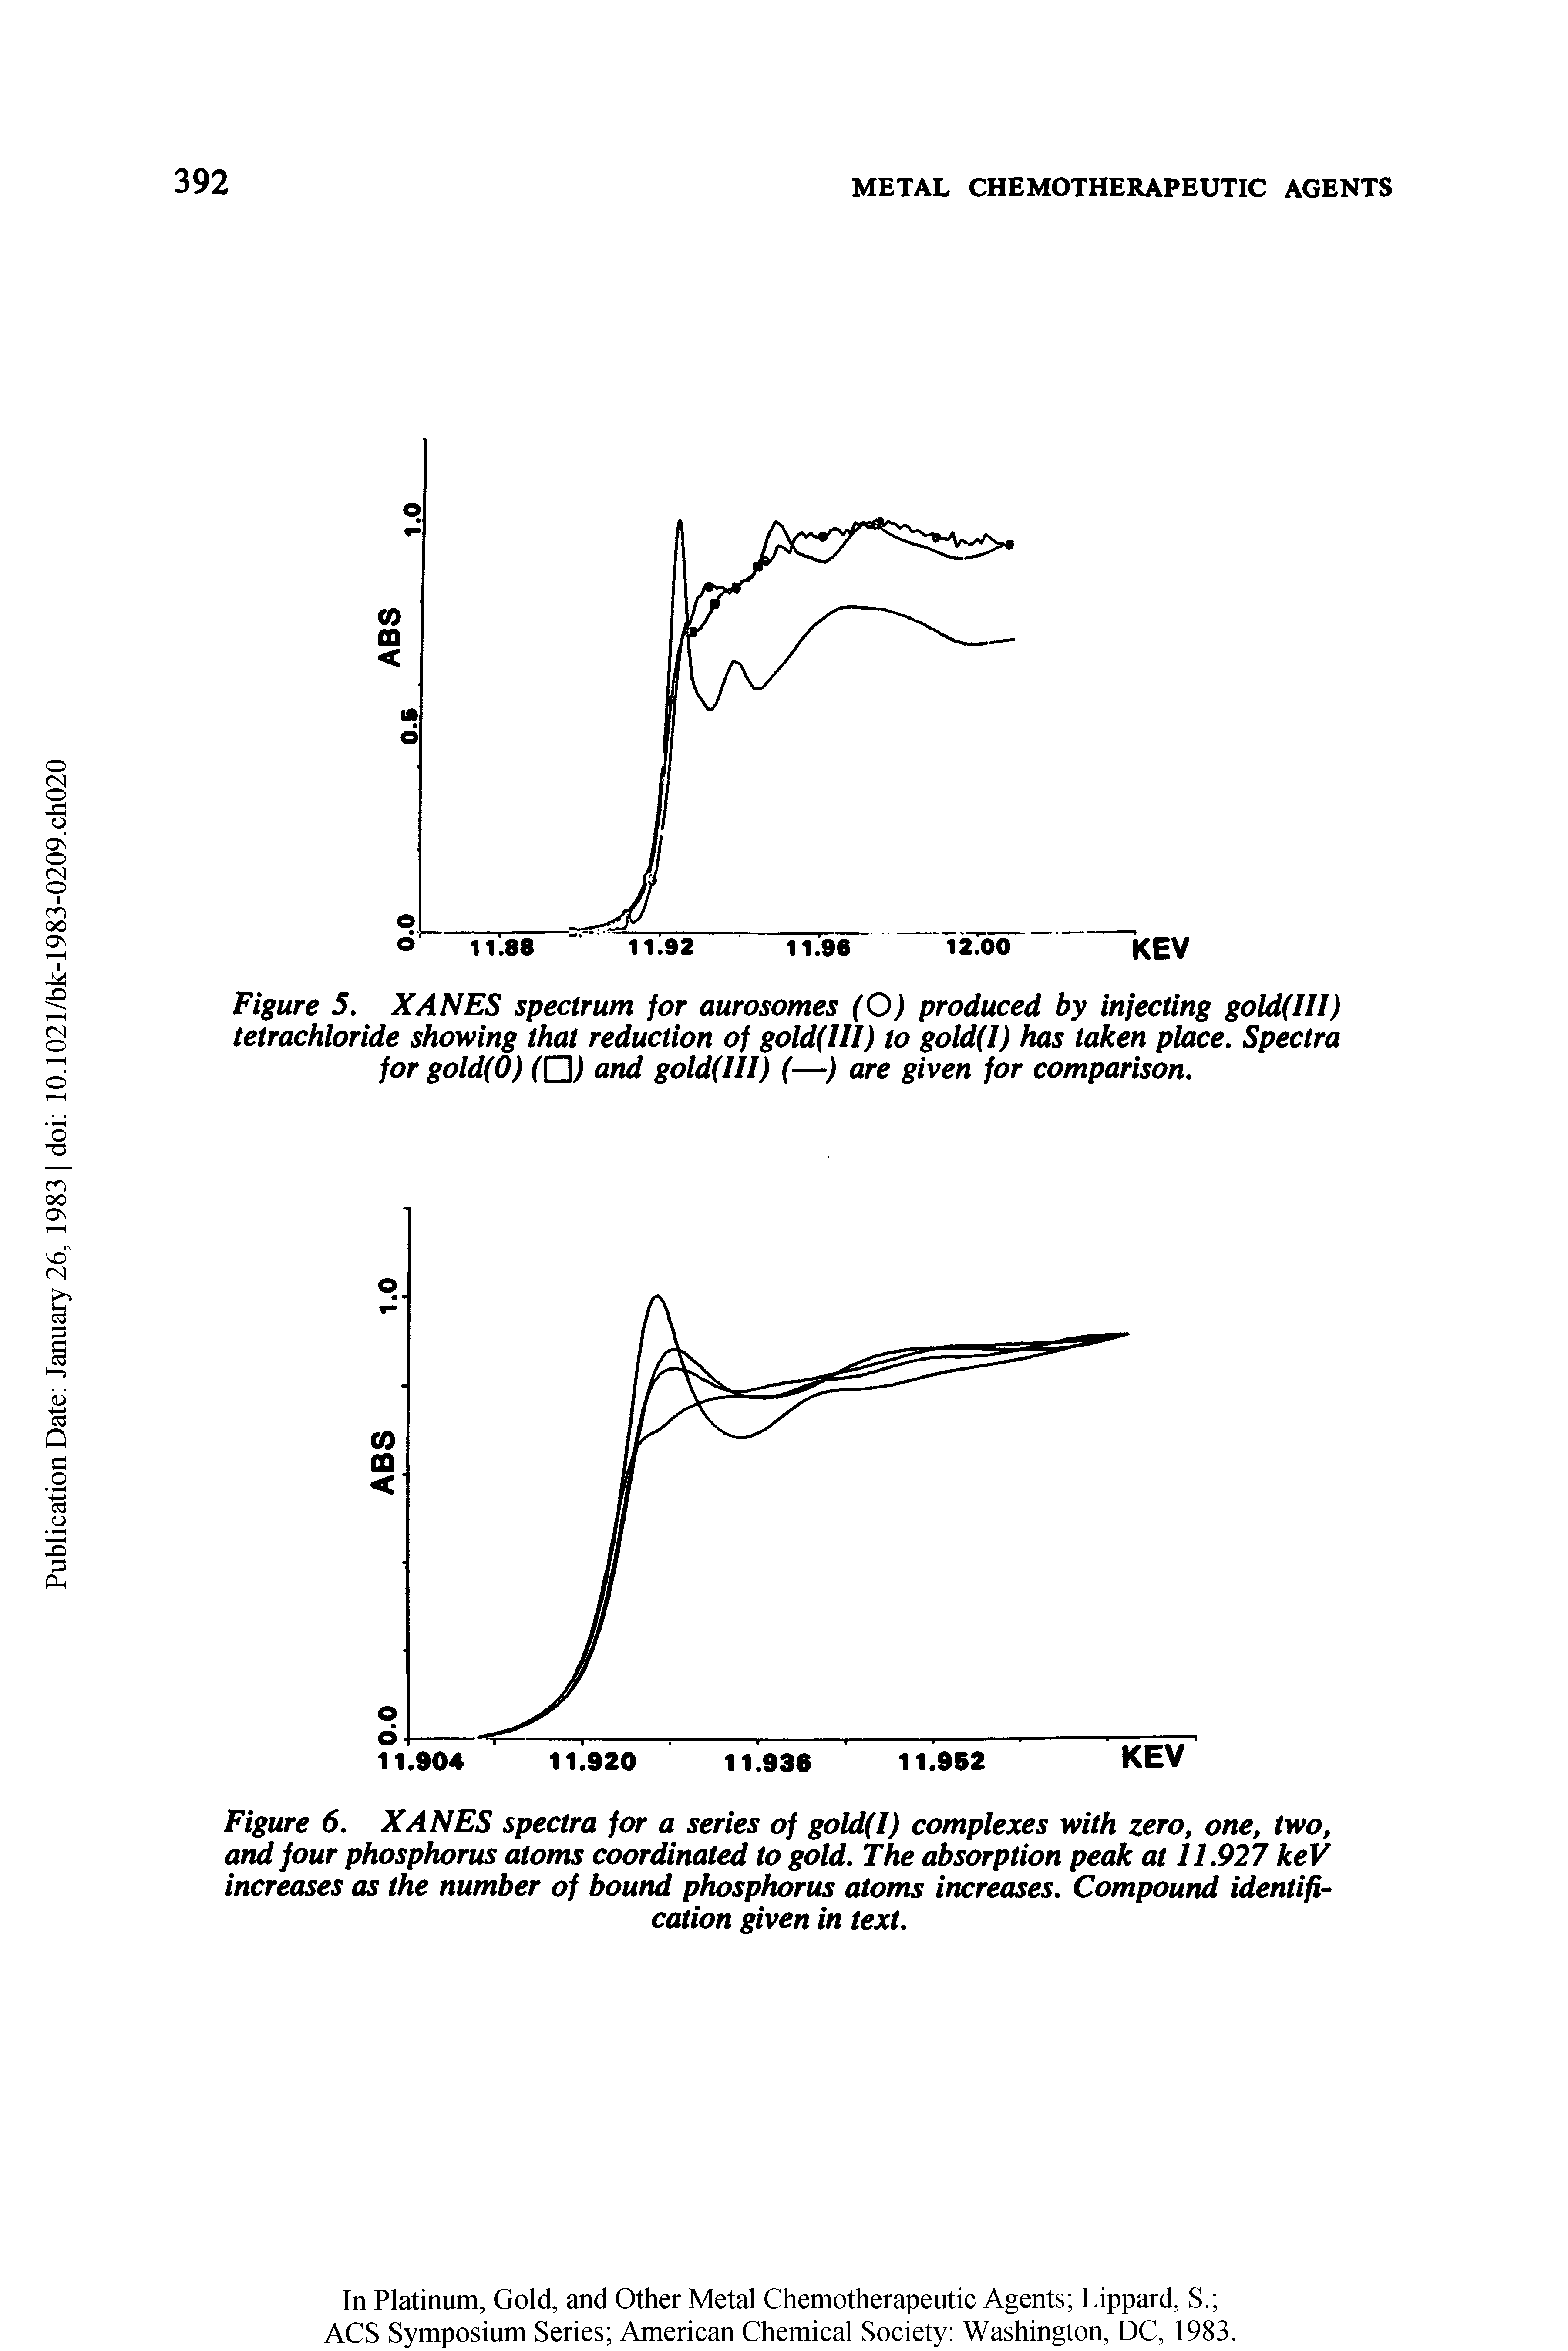 Figure 5. XANES spectrum for aurosomes (O) produced by injecting gold(III) tetrachloride showing that reduction of gold(III) to gold(I) has taken place. Spectra for gold(O) ([2) and gold(III) (—) are given for comparison.